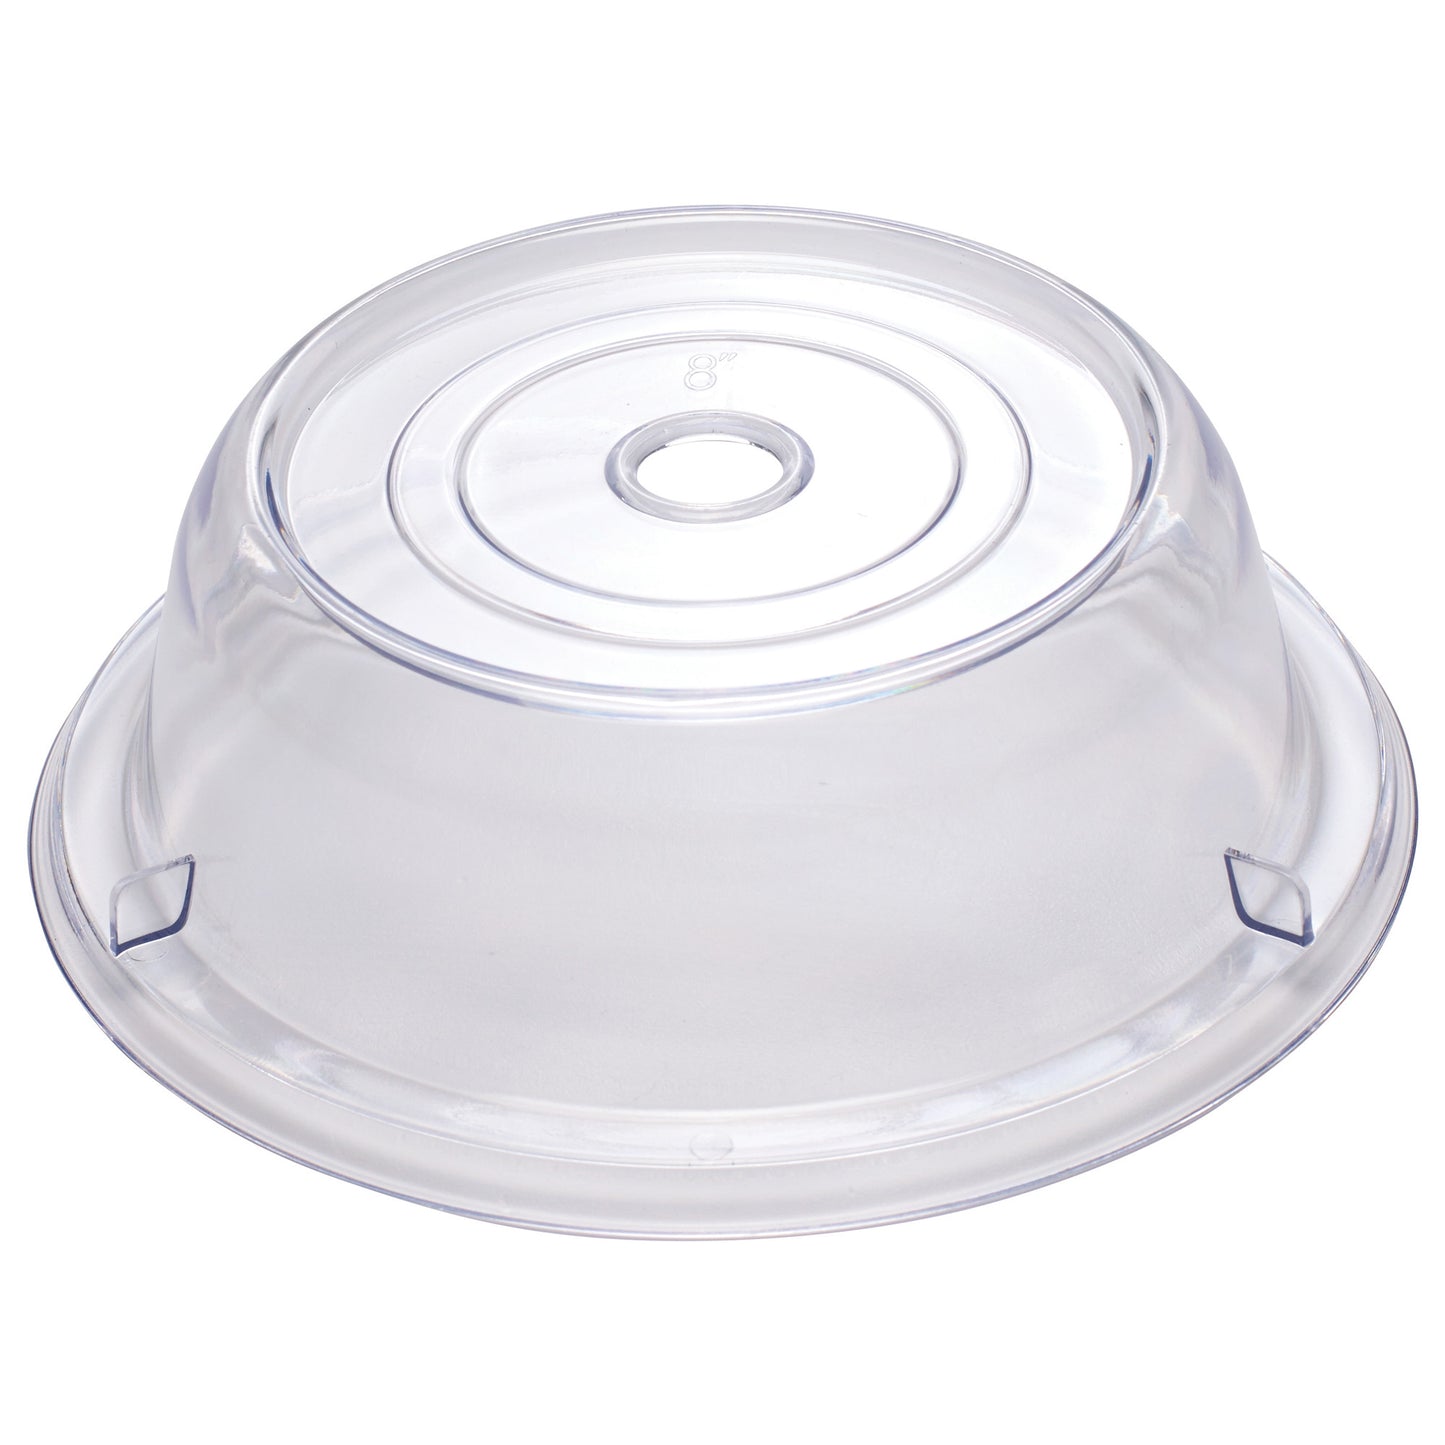 PPCR-8 - Clear Polycarbonate Plate Cover - 8" Dia